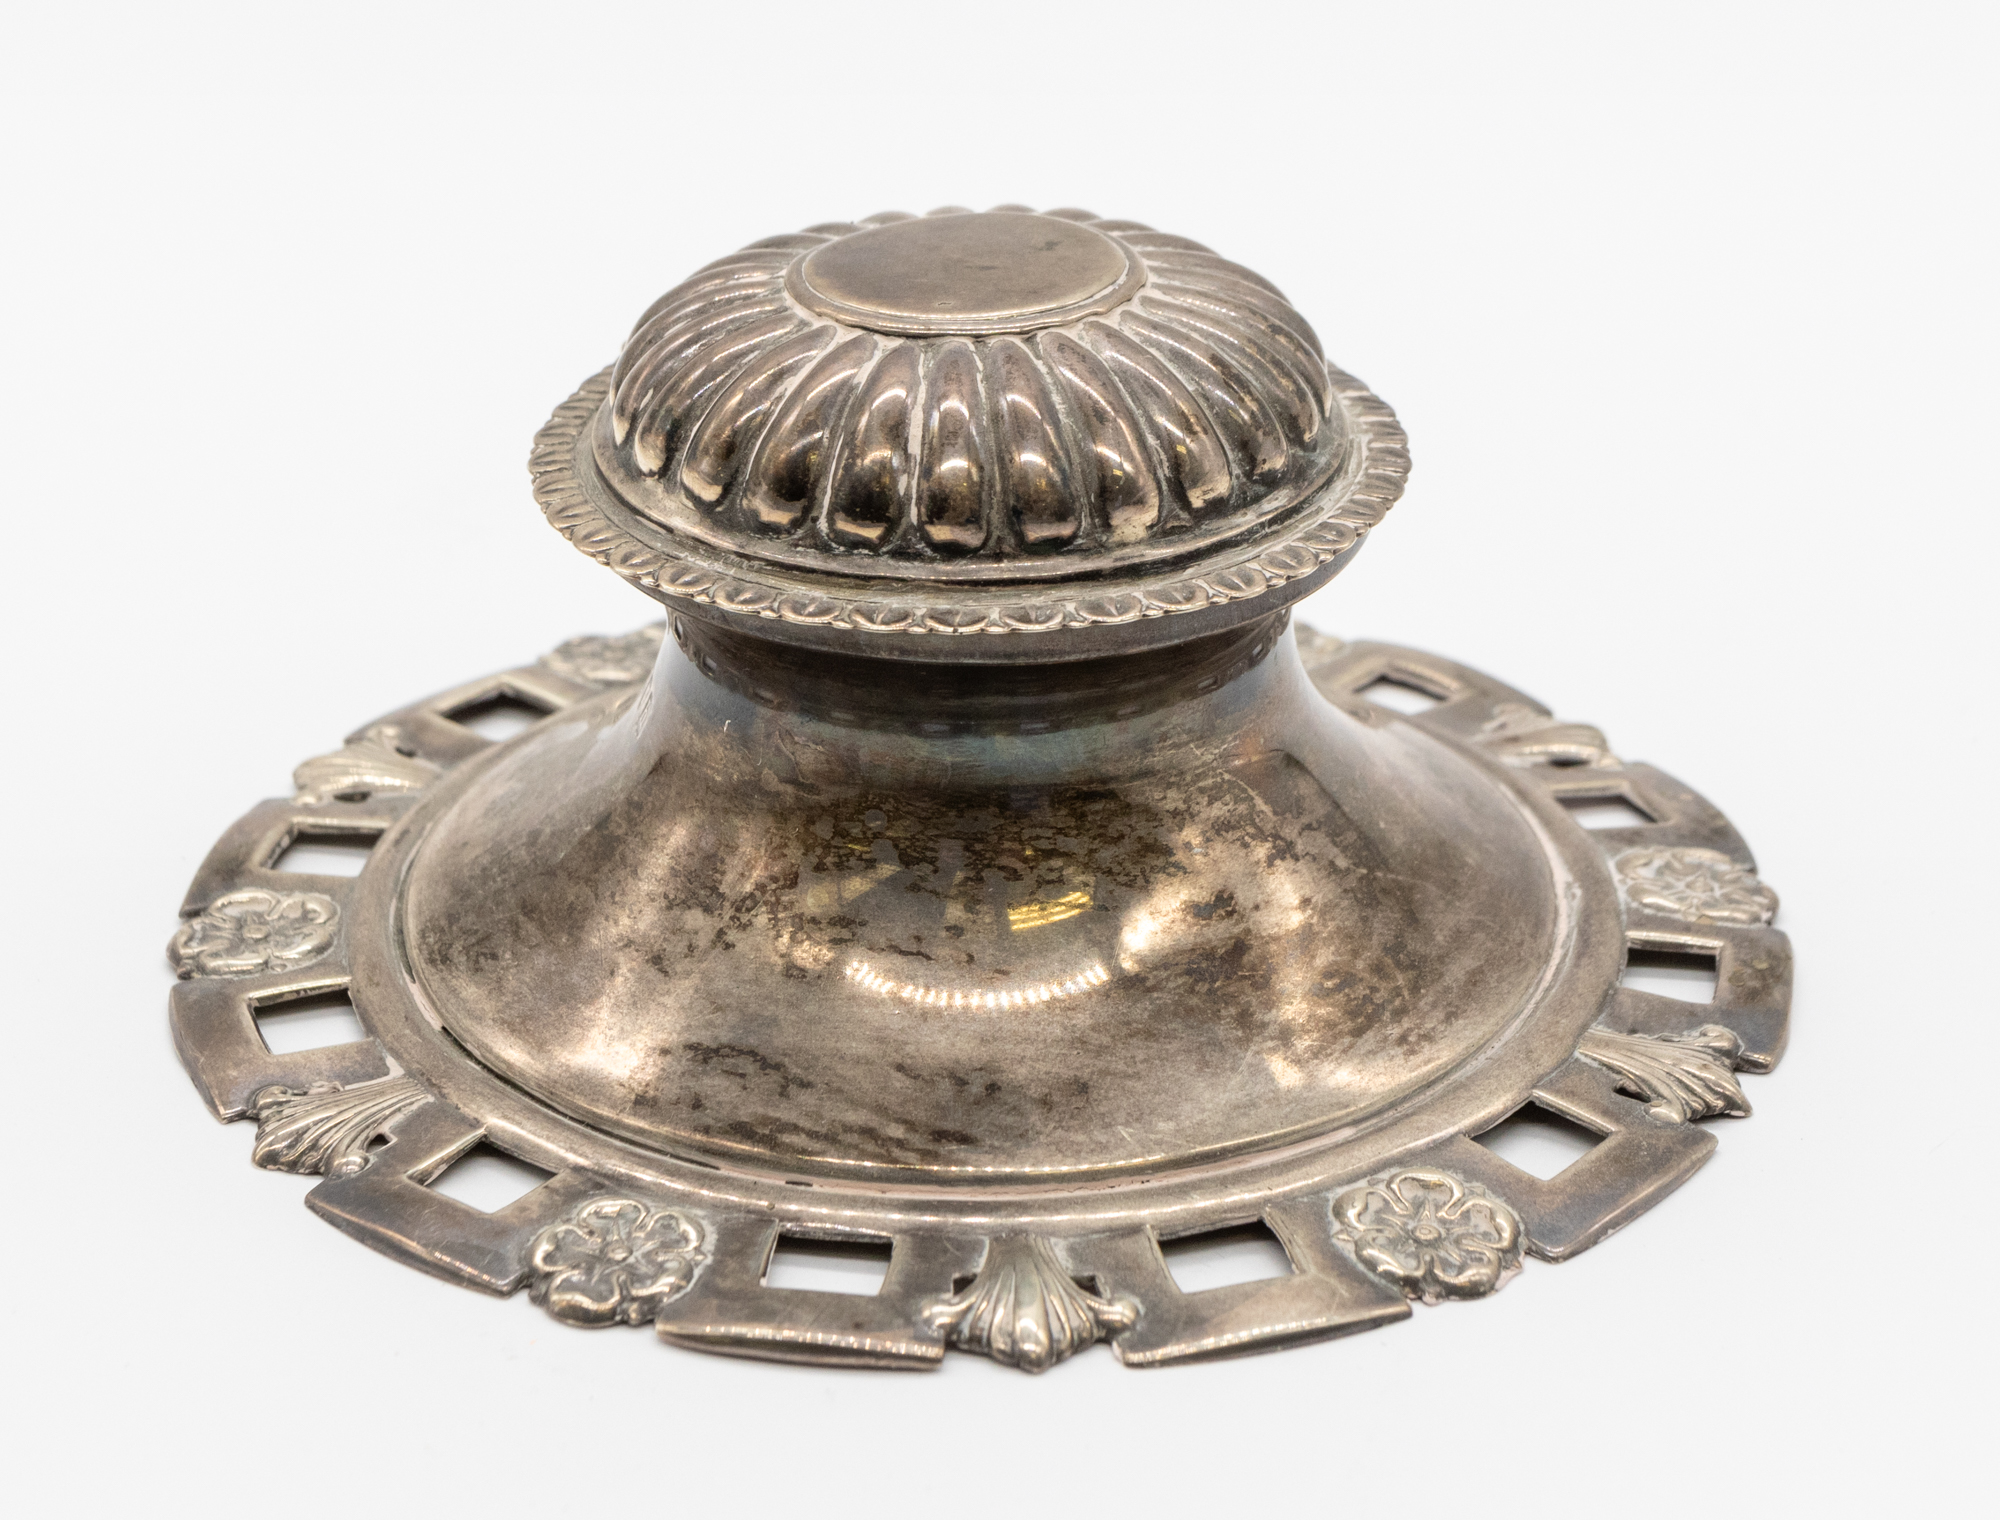 An early 20th century Edwardian silver capstan inkwell, having a stylised pierced design with rose